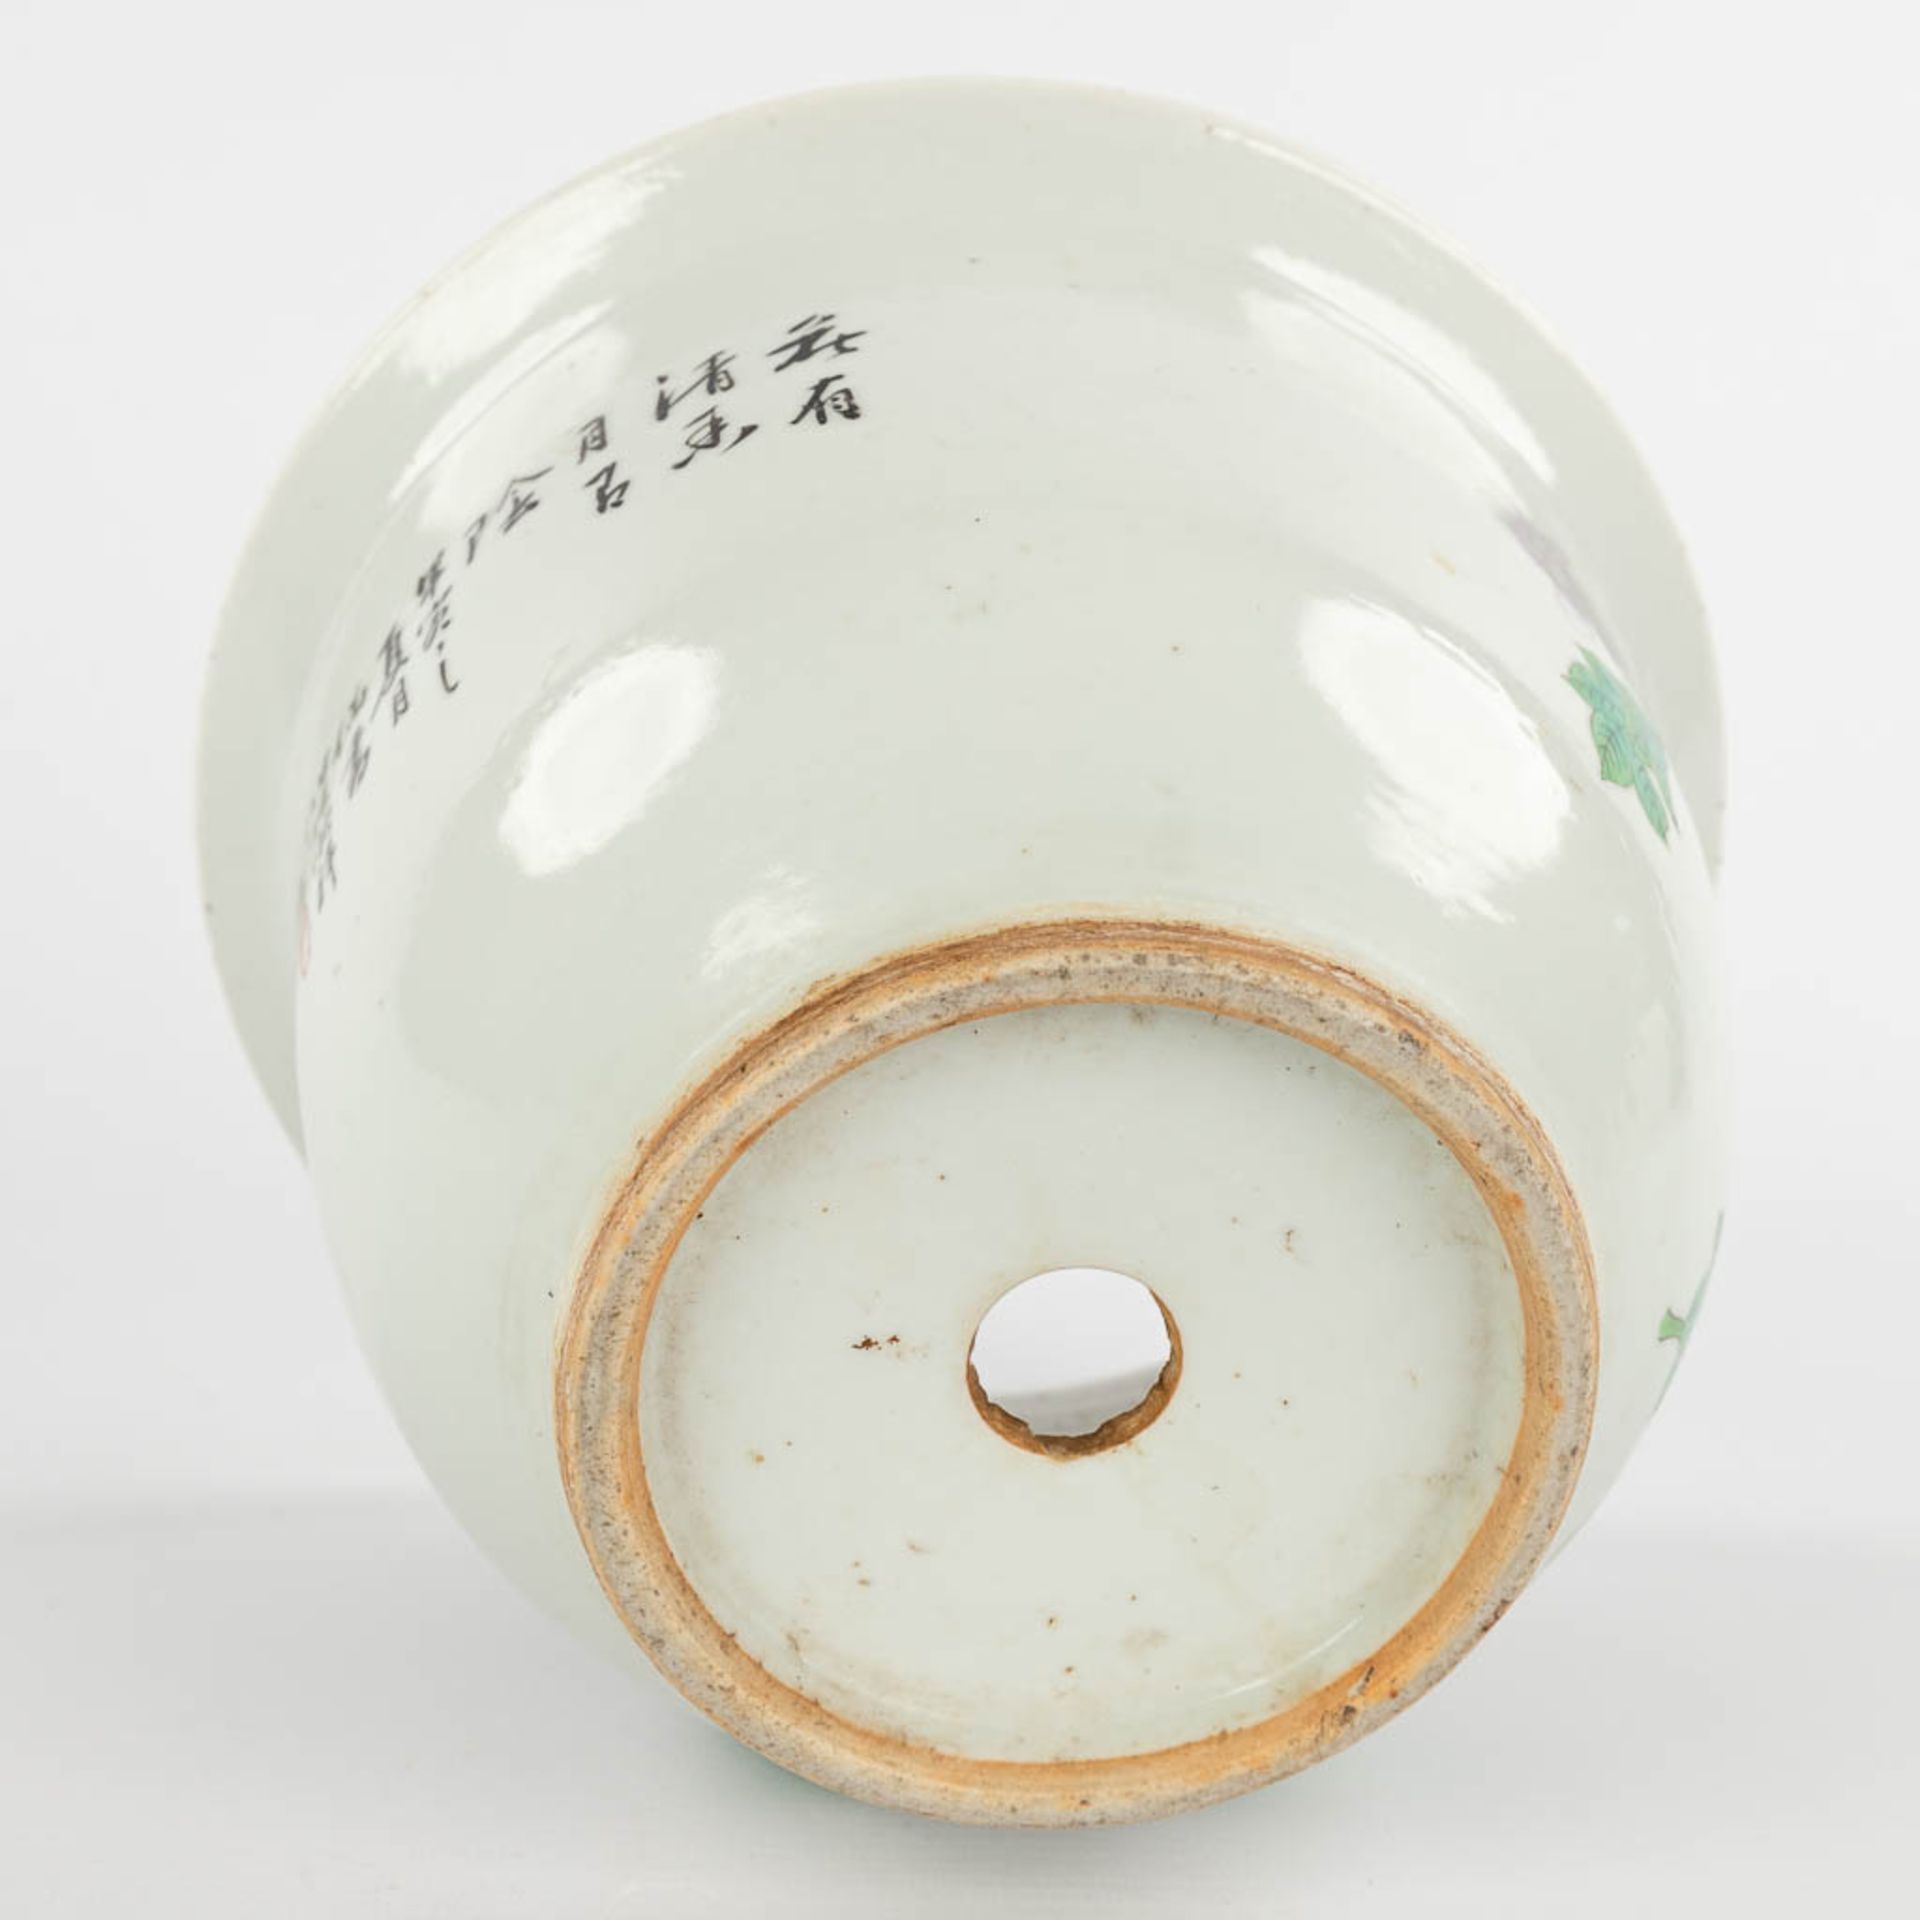 A Chinese Famille Rose cache pot, decorated with flowers. 19th/20th C. (H:15,5 x D:23,5 cm) - Image 8 of 10